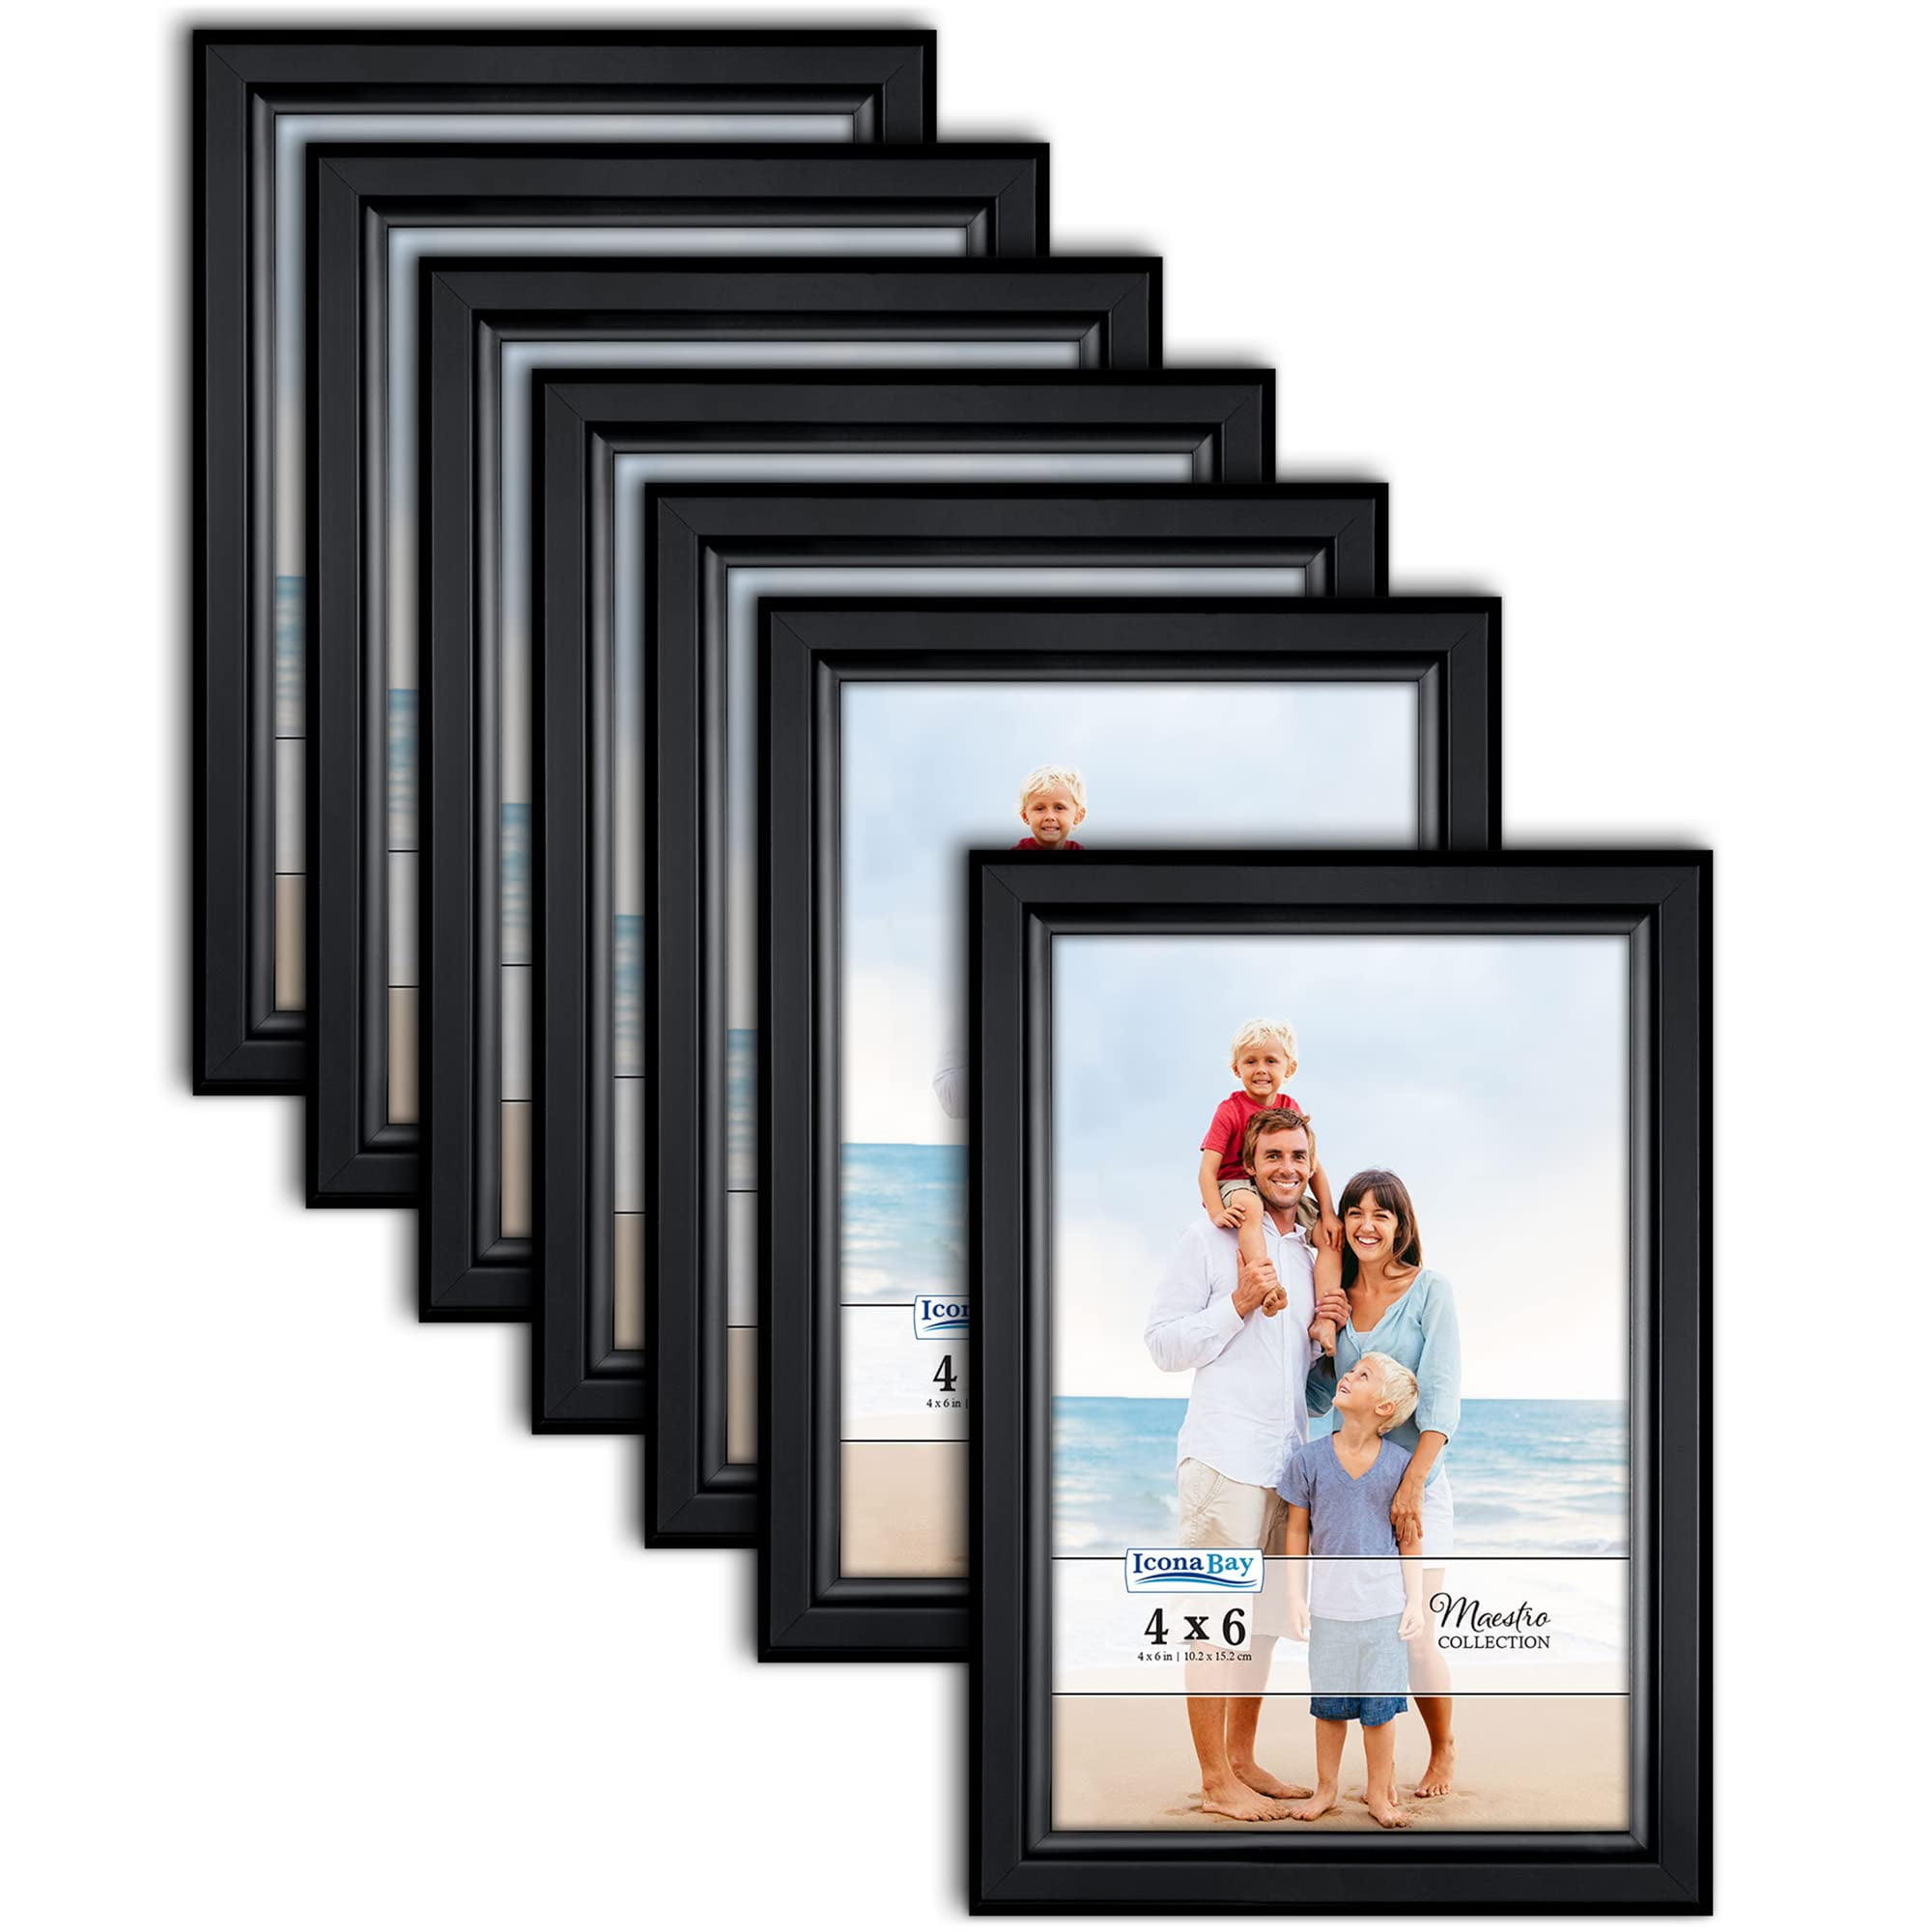 Icona Bay 4x6 Black Picture Frames, Modern Contemporary Style, 12 Pack, Maestro Collection (US Company), Size: 4 inch x 6 inch